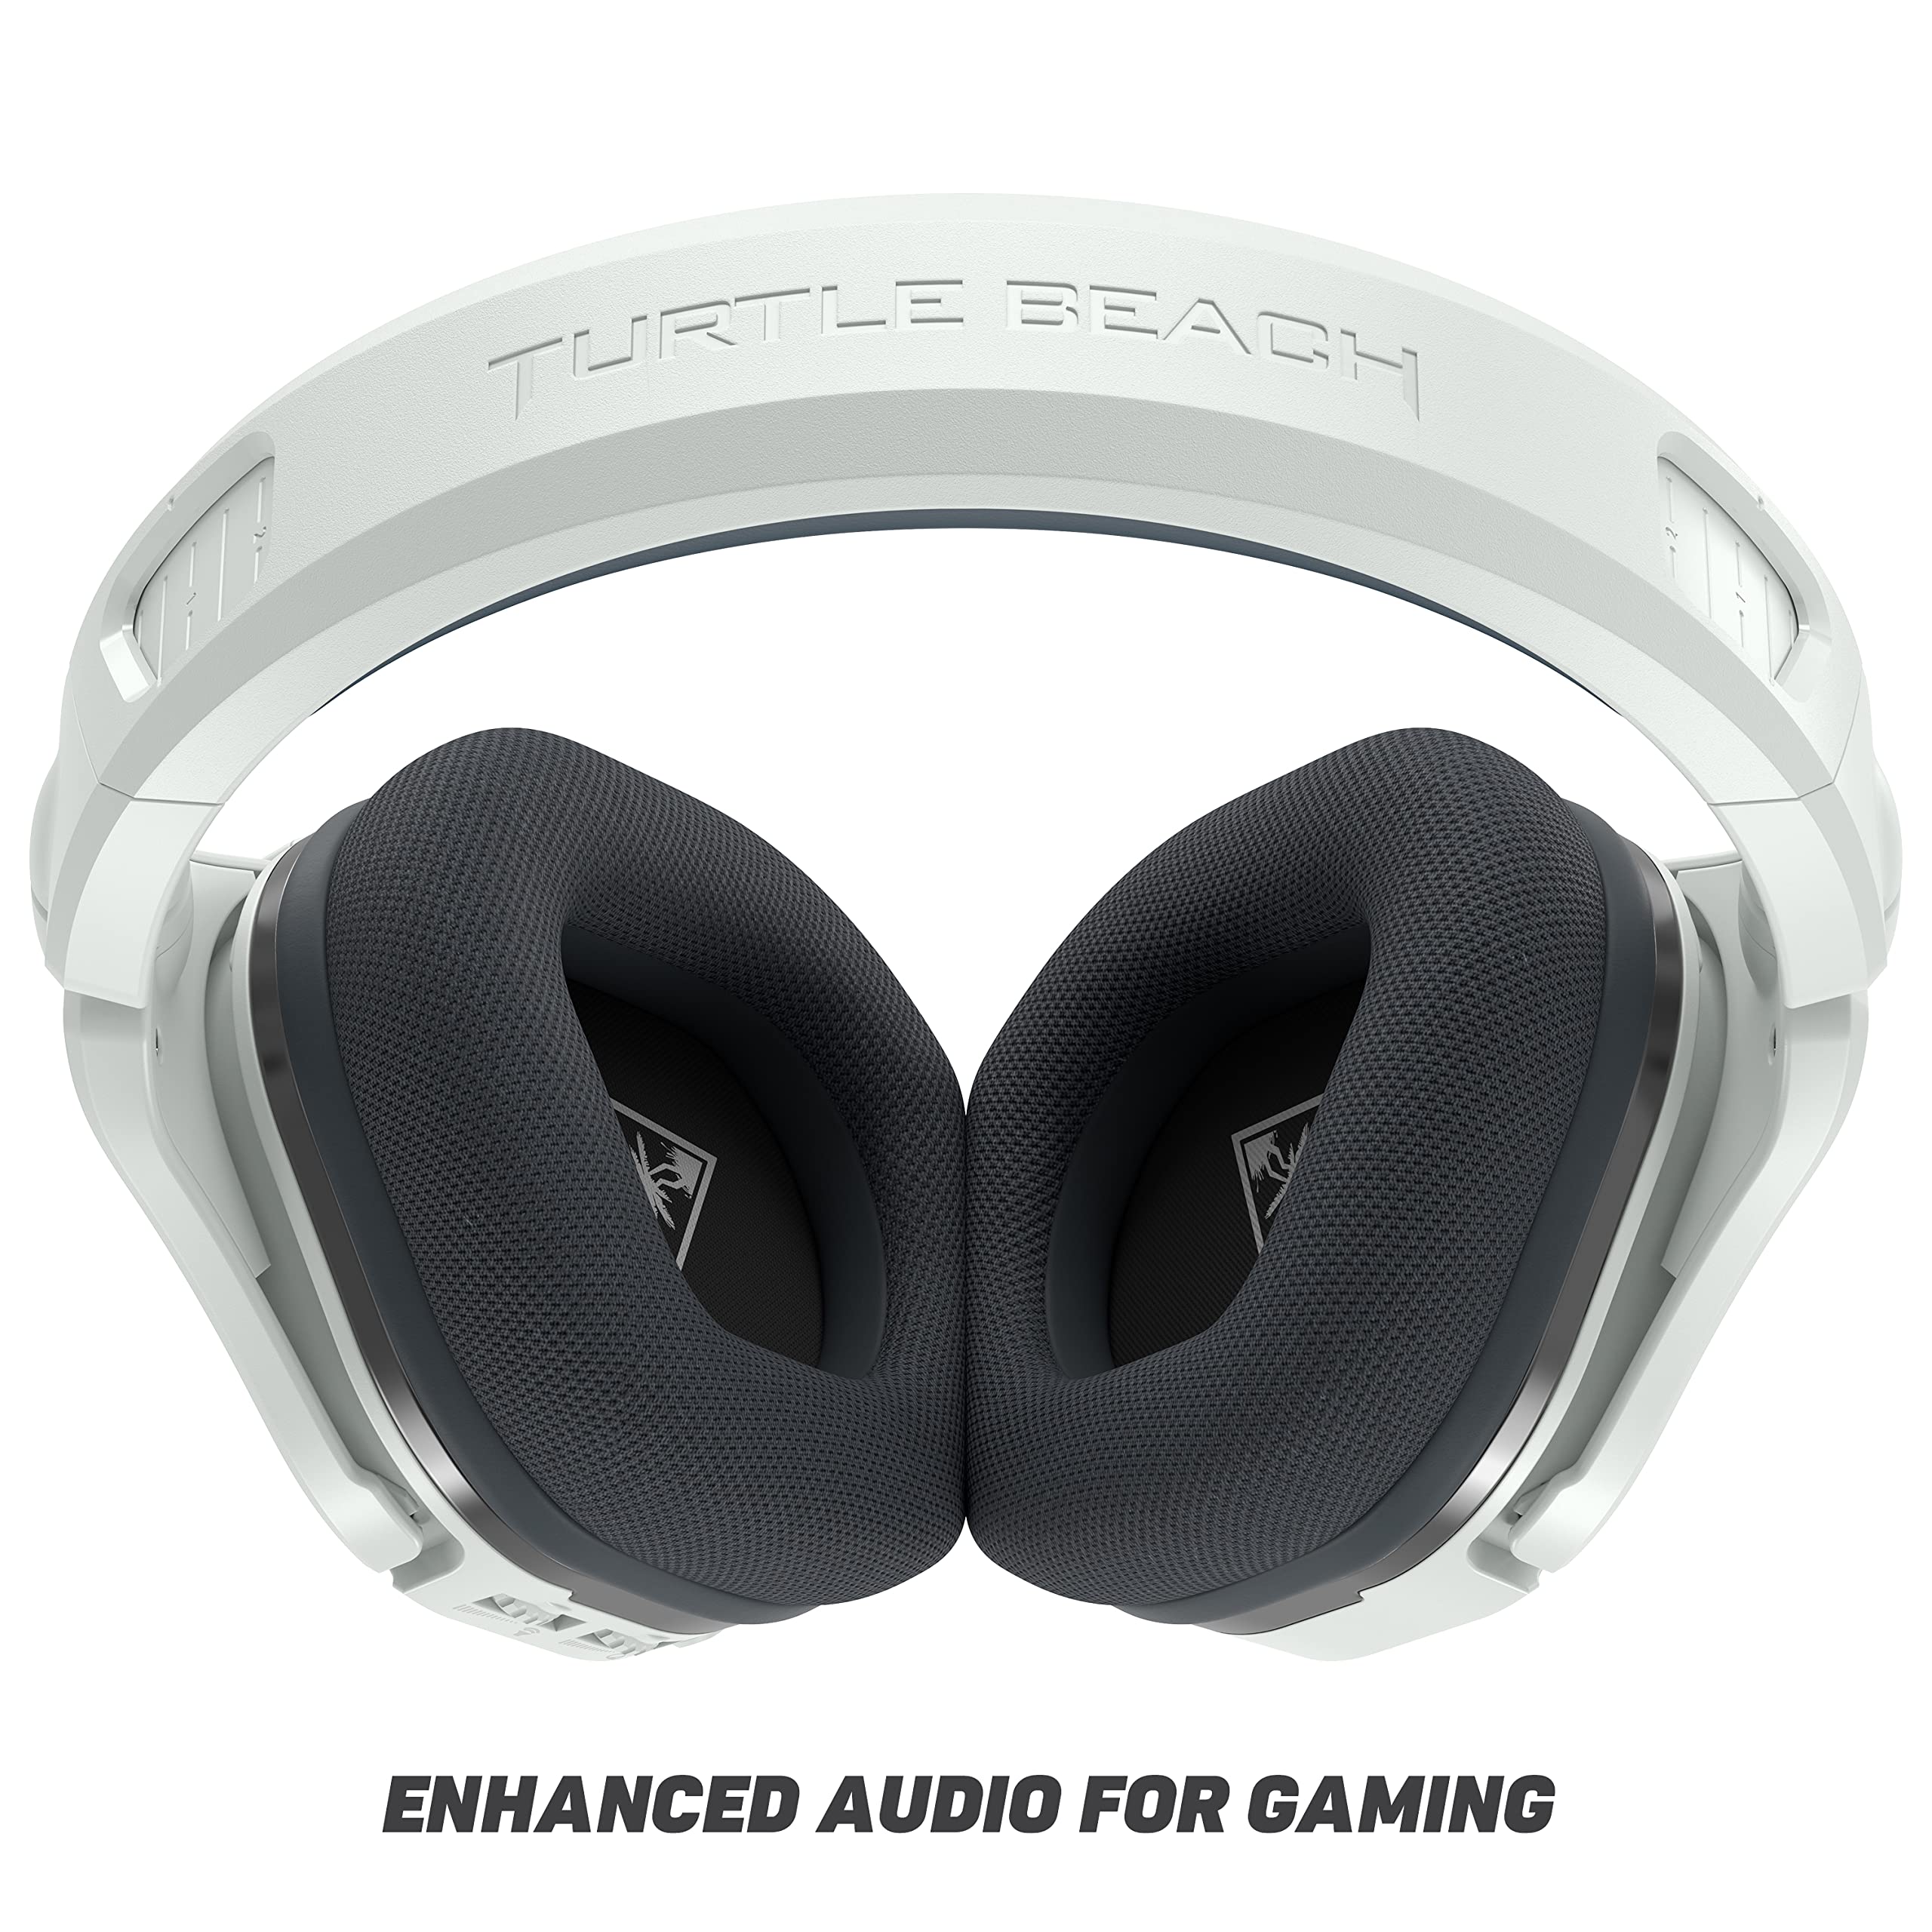 Turtle Beach Stealth 600 Gen 2 Wireless Gaming Headset for Xbox Series X|S, Xbox One, & Windows 10 & PCs with 50mm Speakers, 15Hour Battery life, Flip-to-Mute Mic and Spatial Audio - White (Renewed)